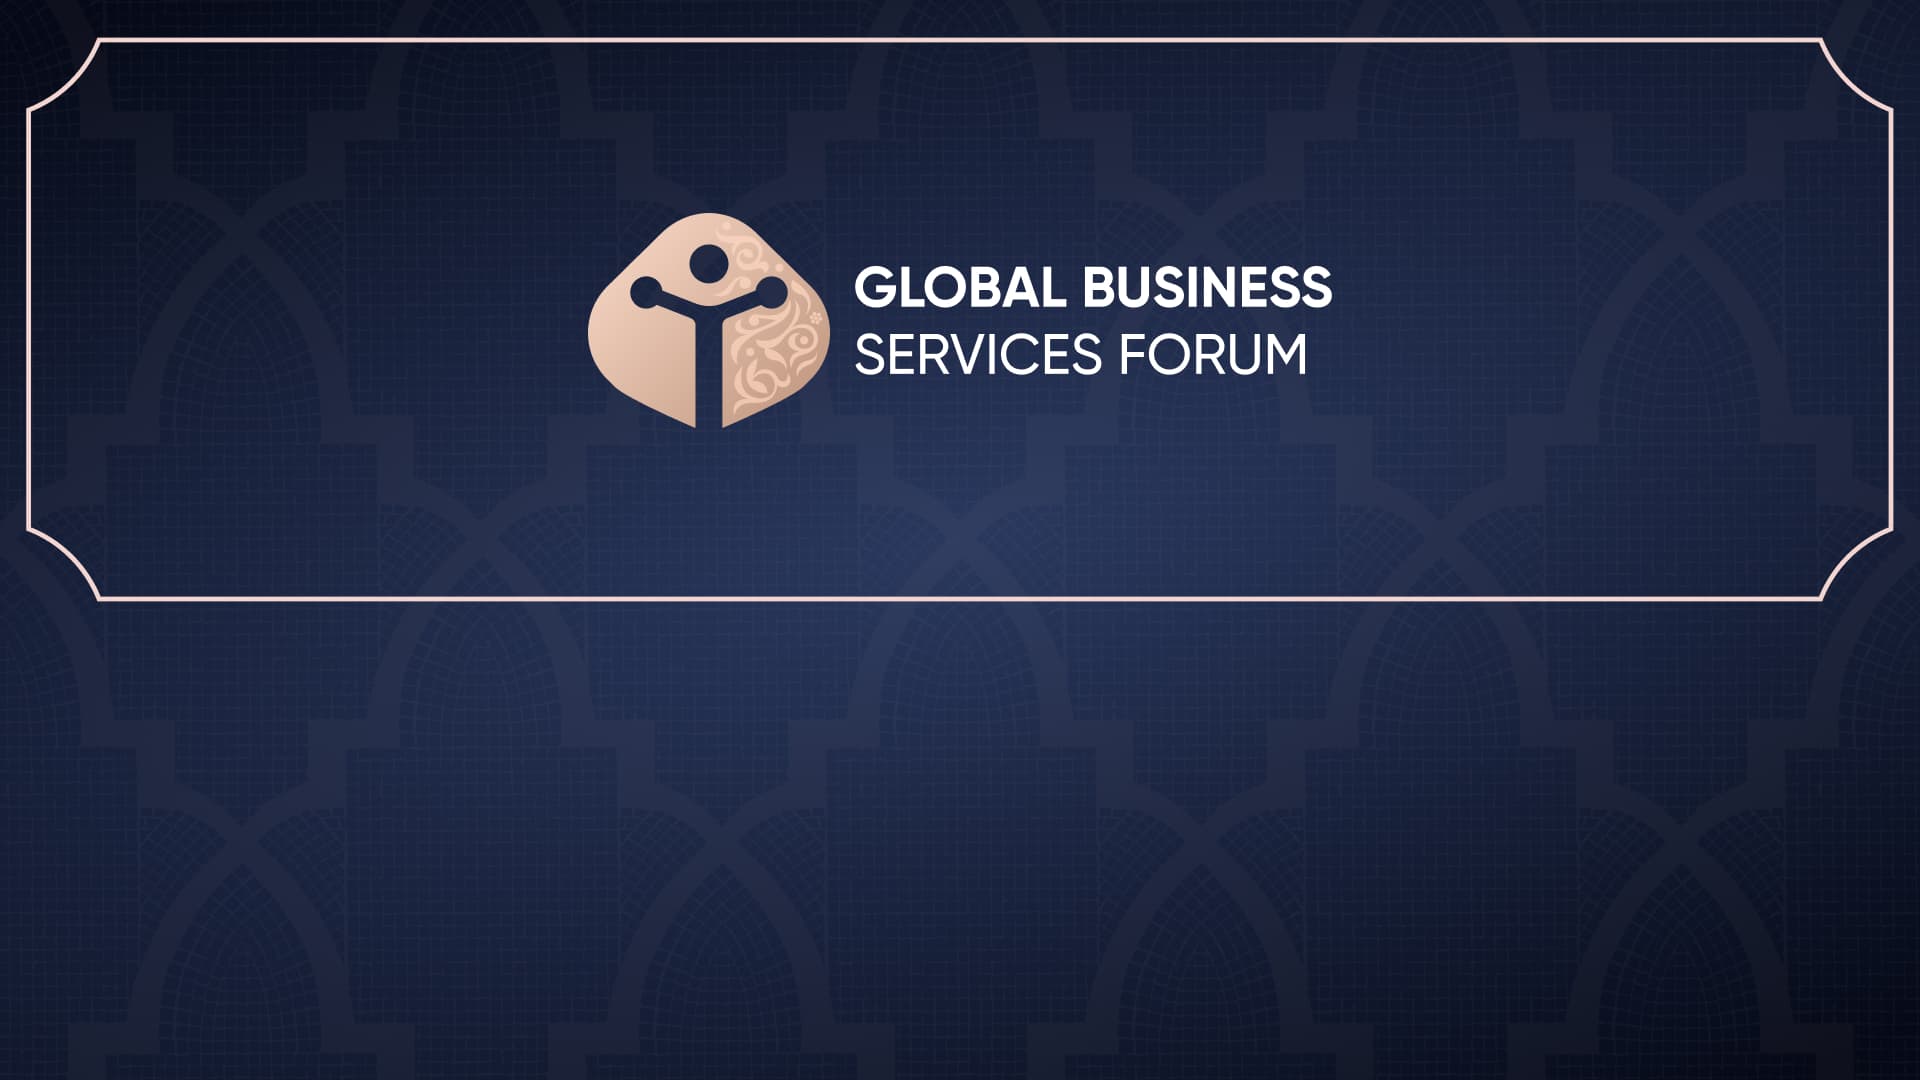 GLOBAL BUSINESS SERVICES FORUM